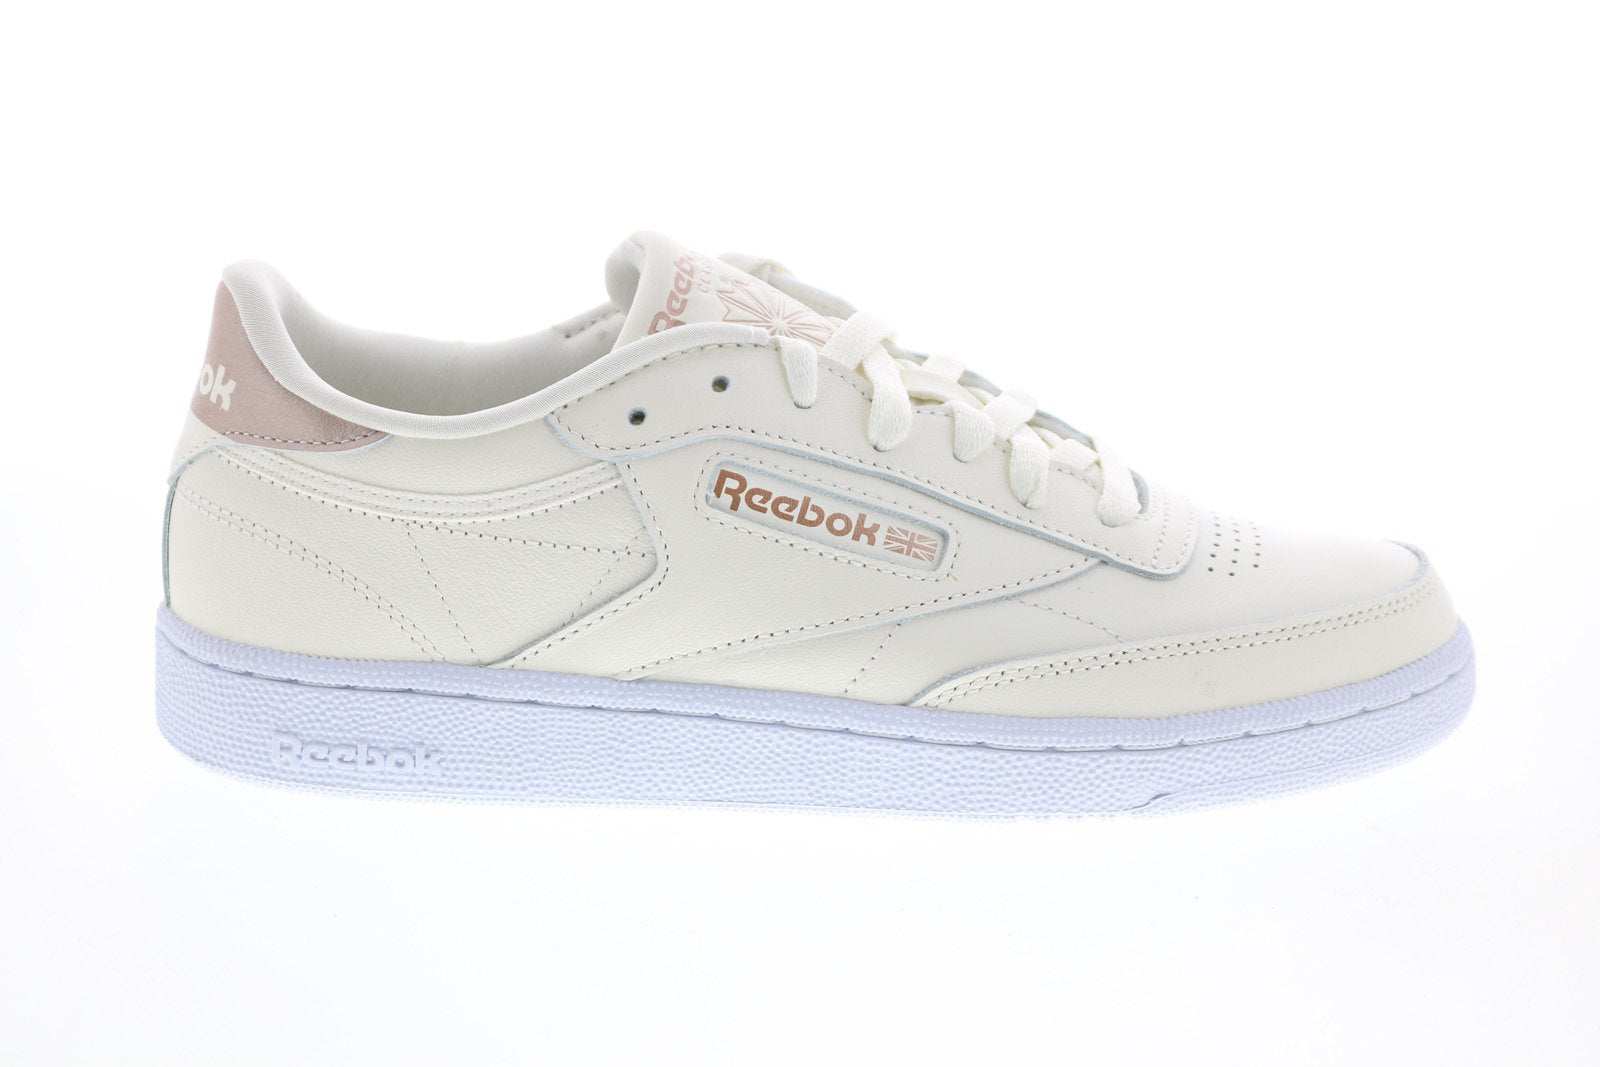 Reebok Club C 85 FX3030 Womens Beige Leather Lifestyle Sneakers Shoes ...